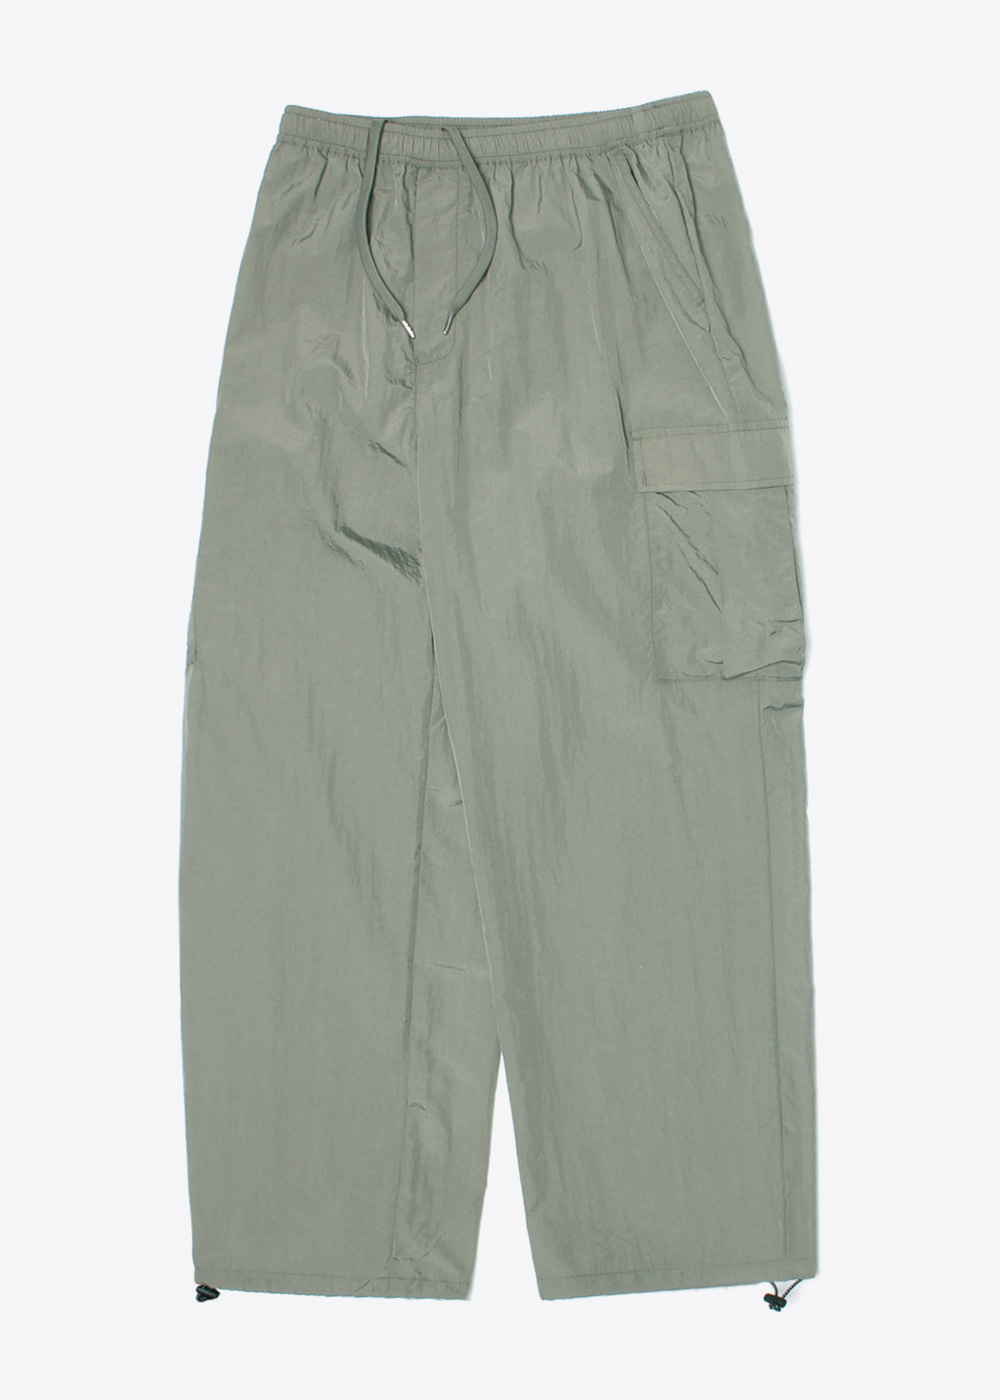 NIKO AND’loose fit’nylon string cargo pants